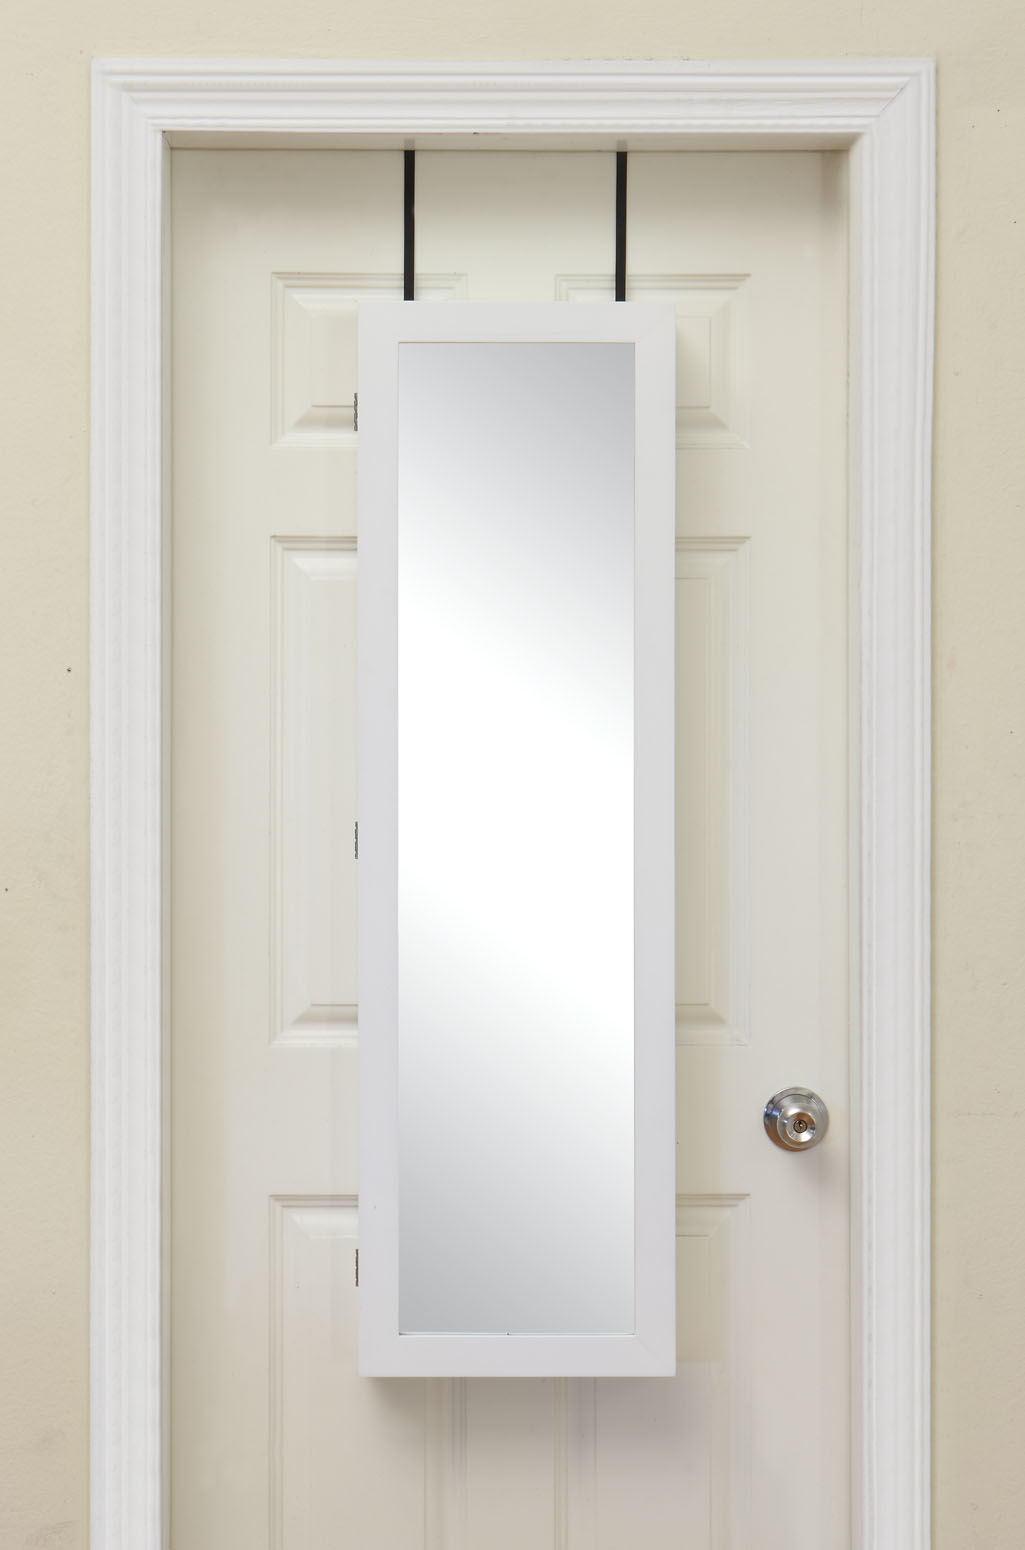 Bring Home Functional Style with an OvertheDoor Mirror